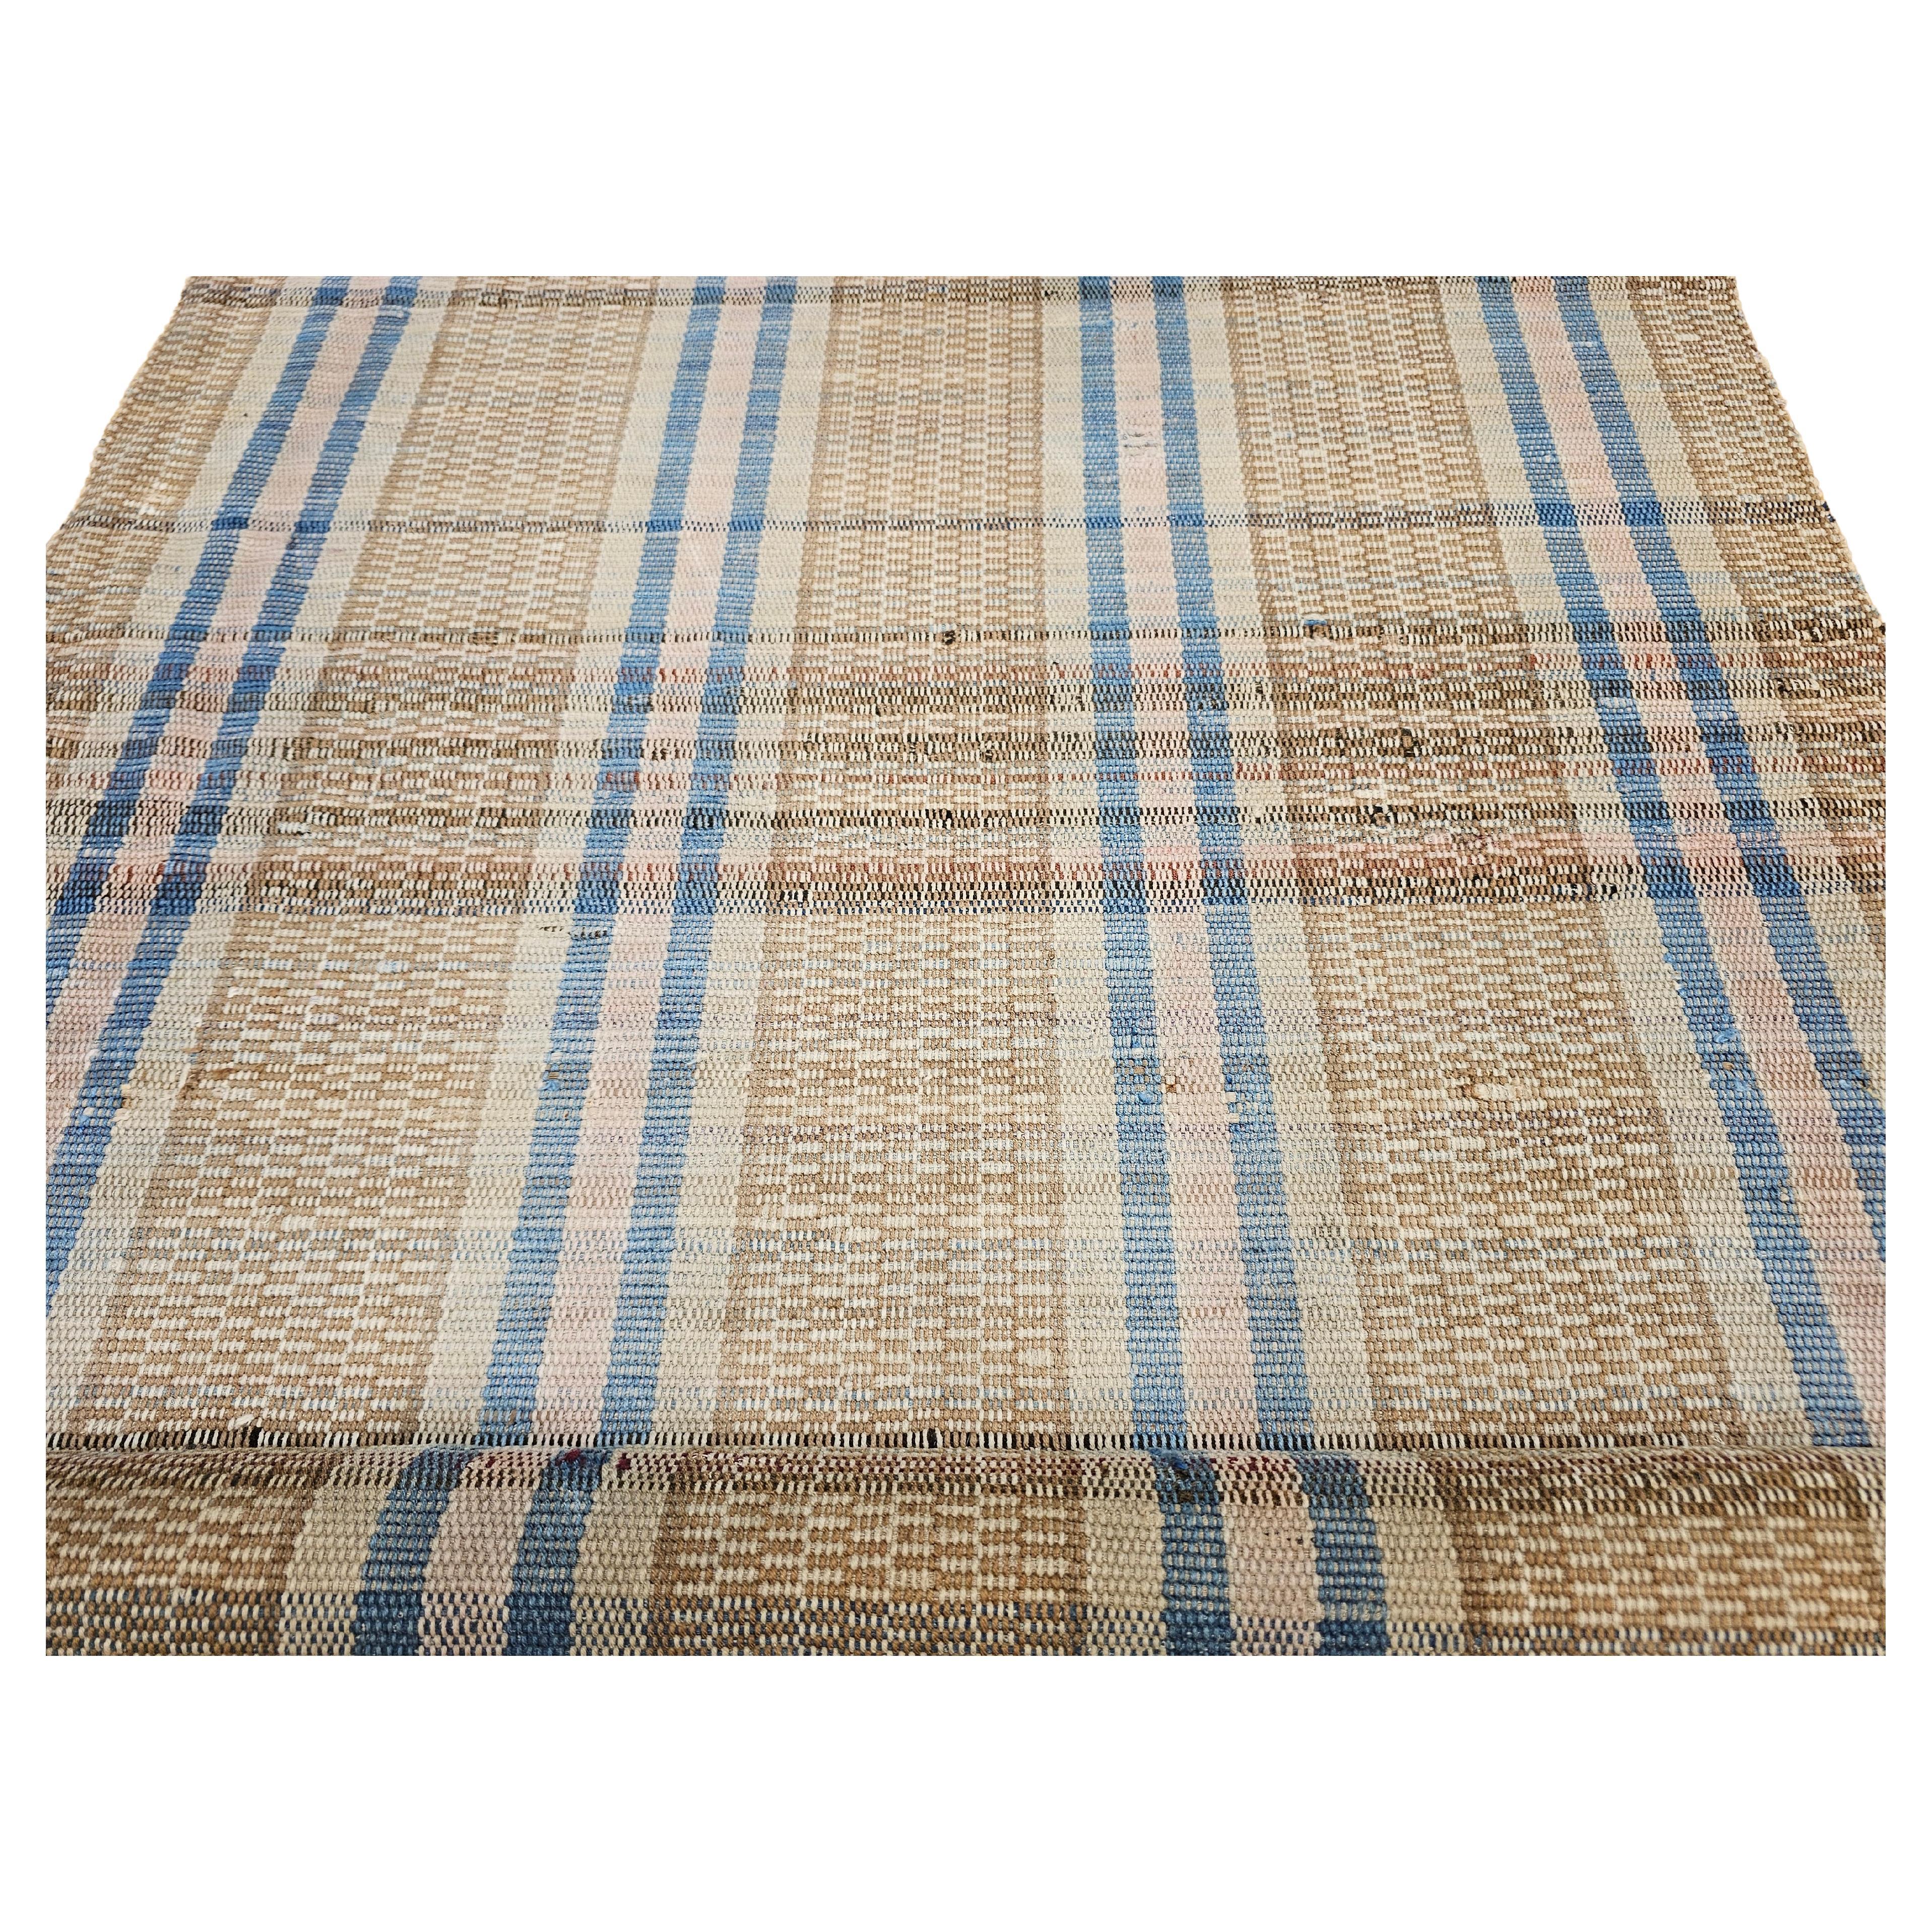 Vintage Hand-Woven American Amish Rag Runner in Pale Blue, Pink, Wheat, Caramel